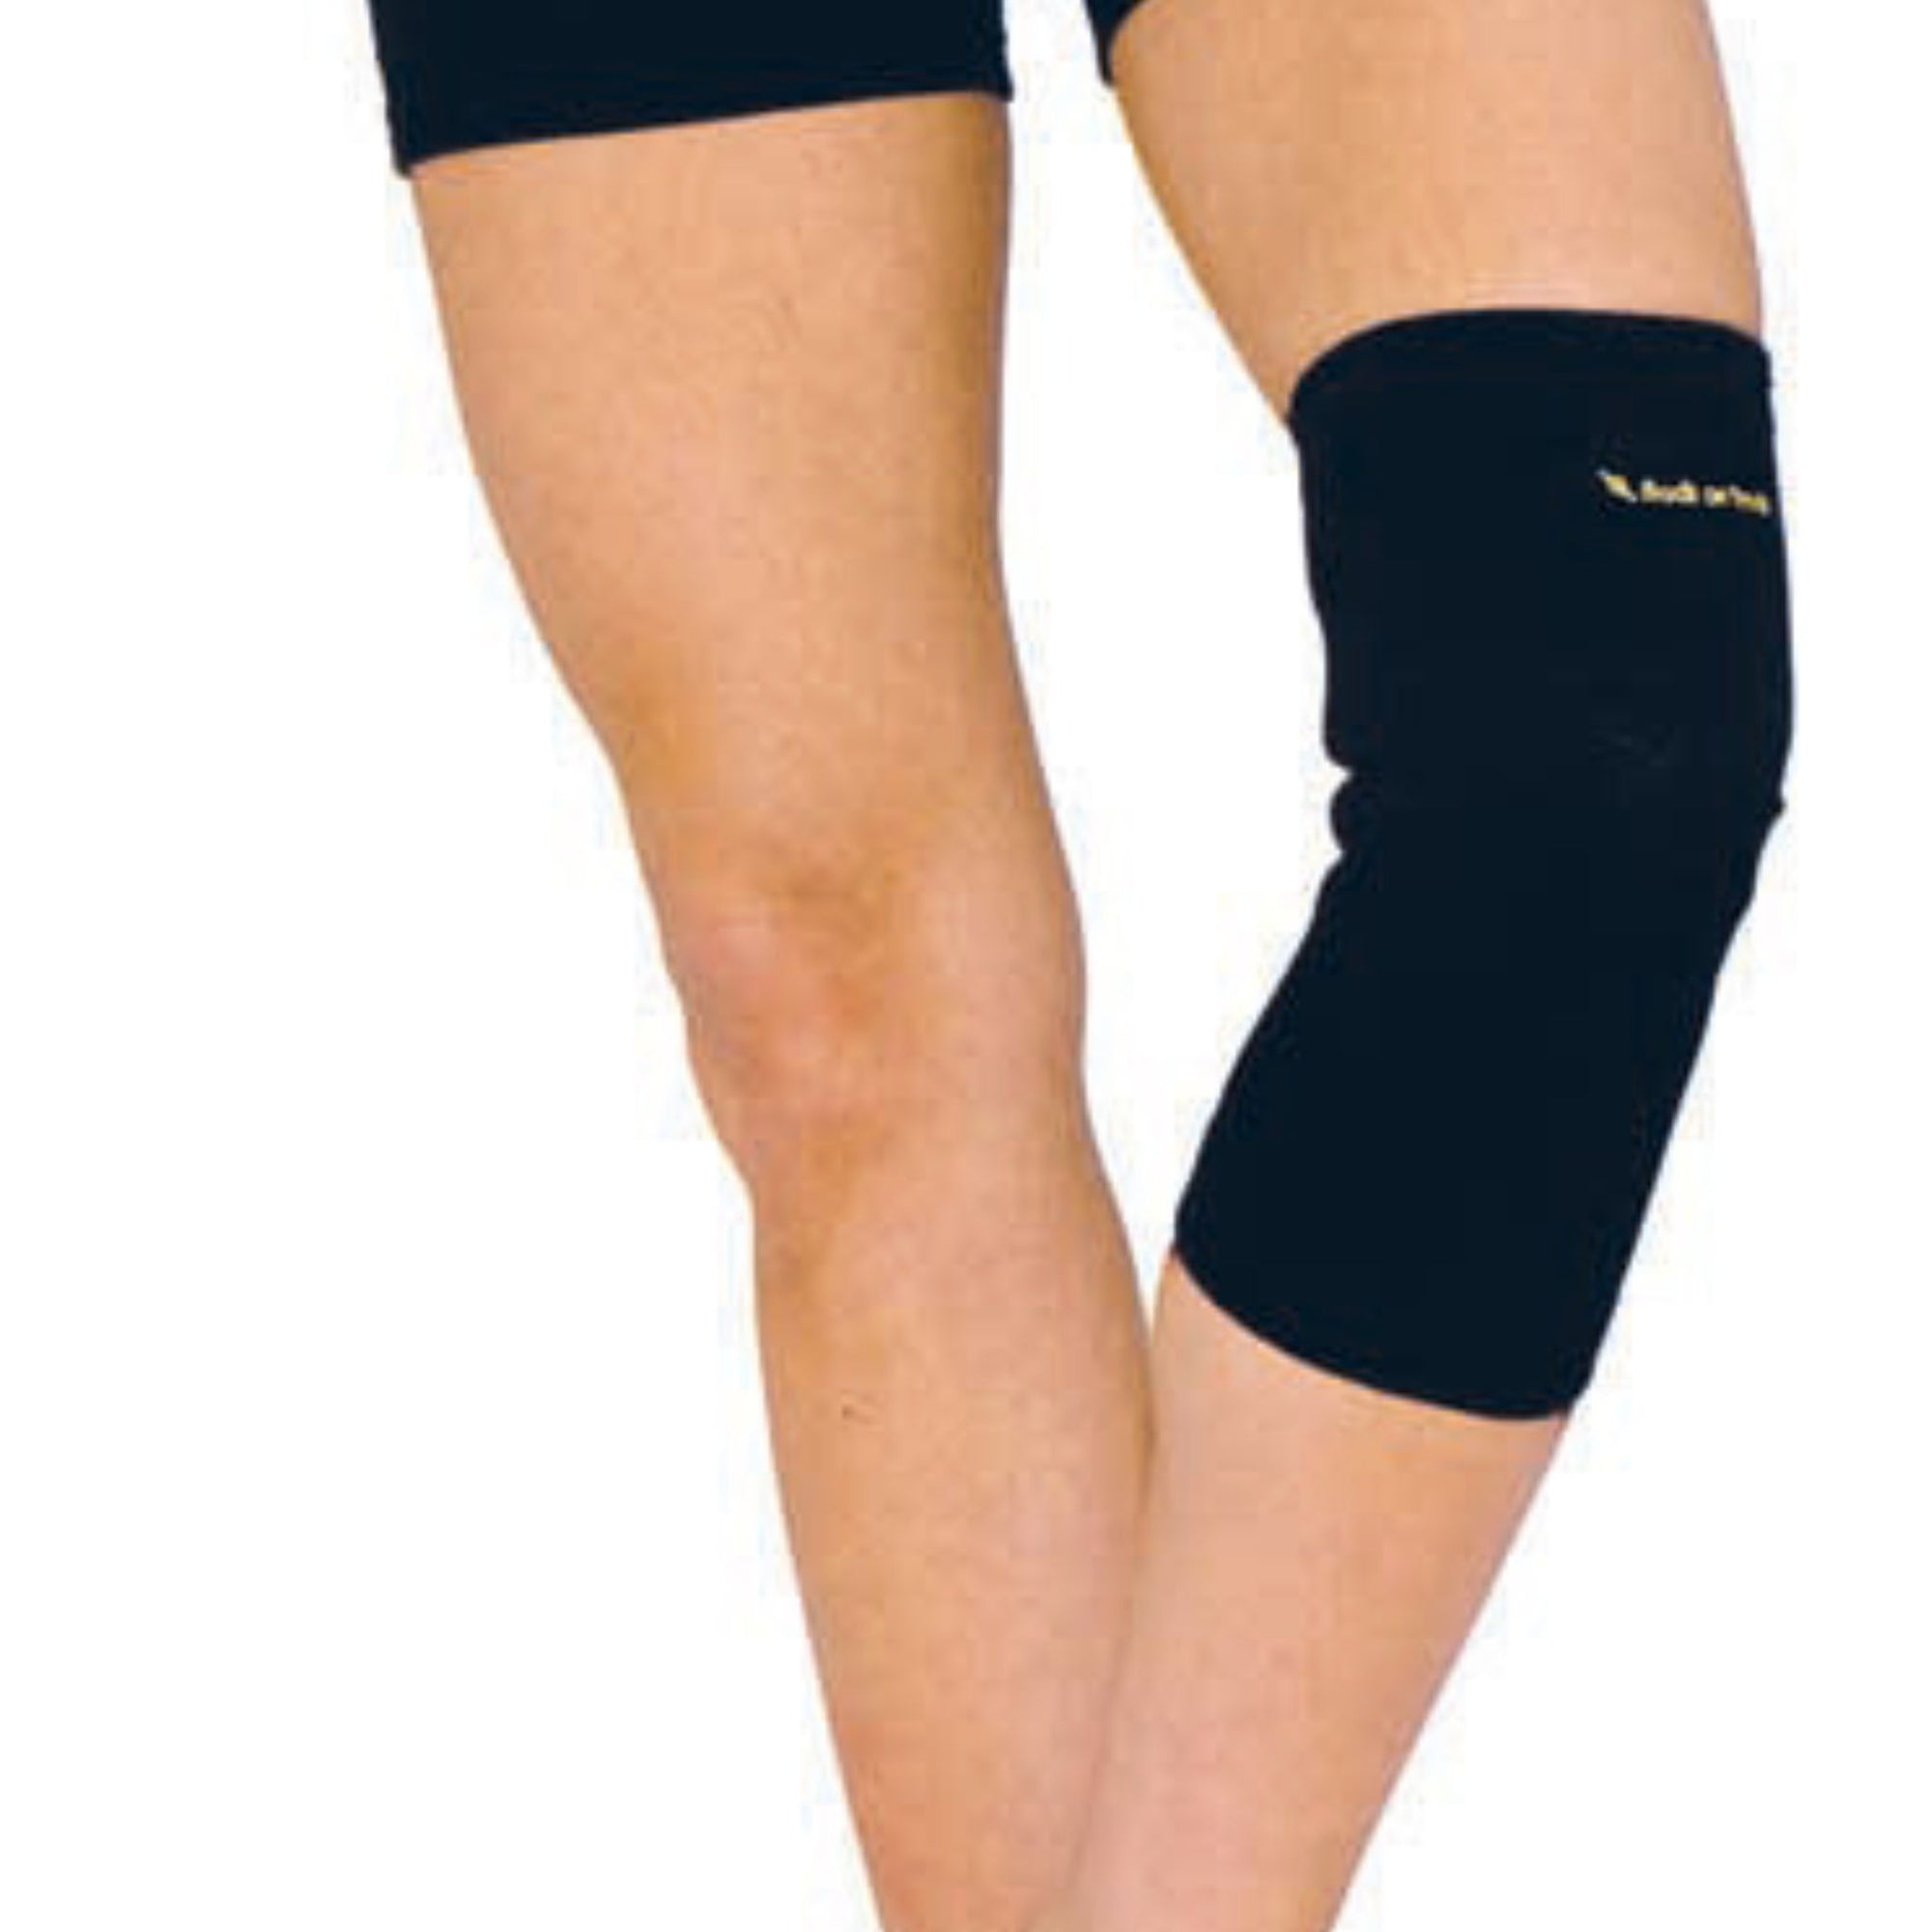 Black slip on knee brace with a gold embroidered logo.